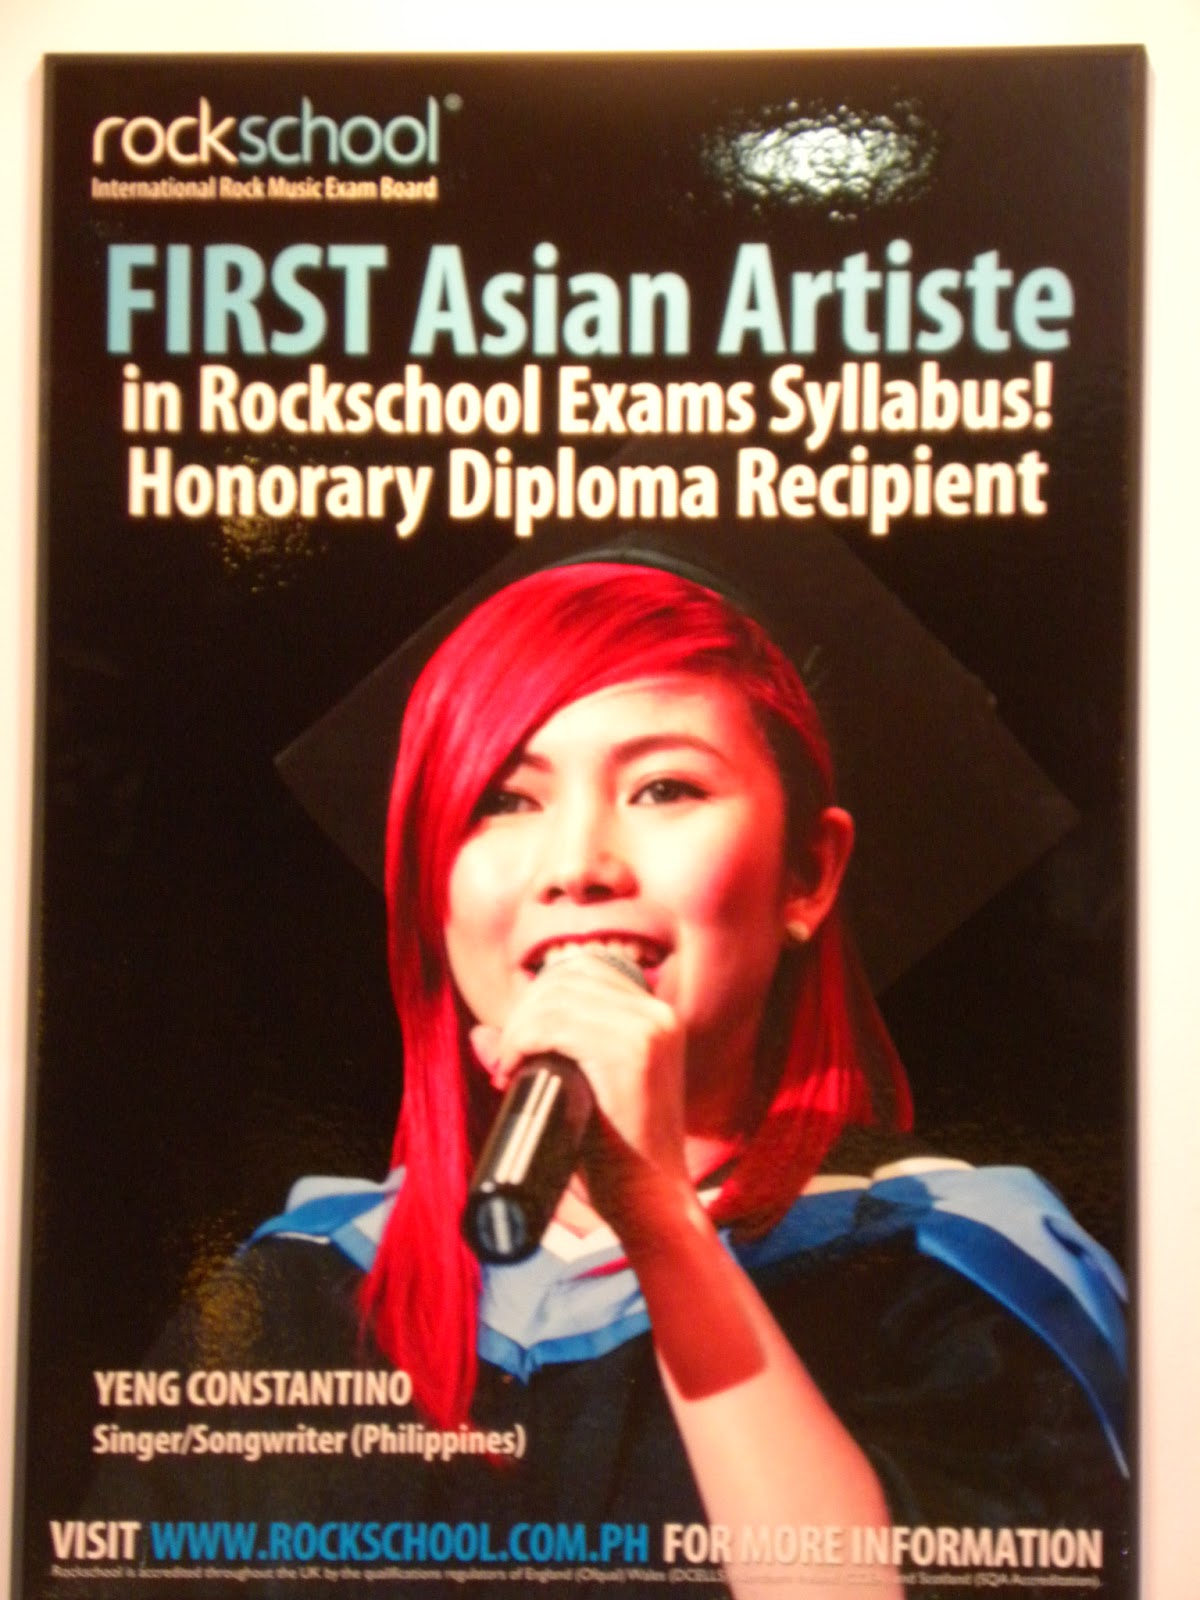 Amazing Jing for Life: YENG CONSTANTINO: First Filipino and Asian Ambassadress at the Academy of Rock